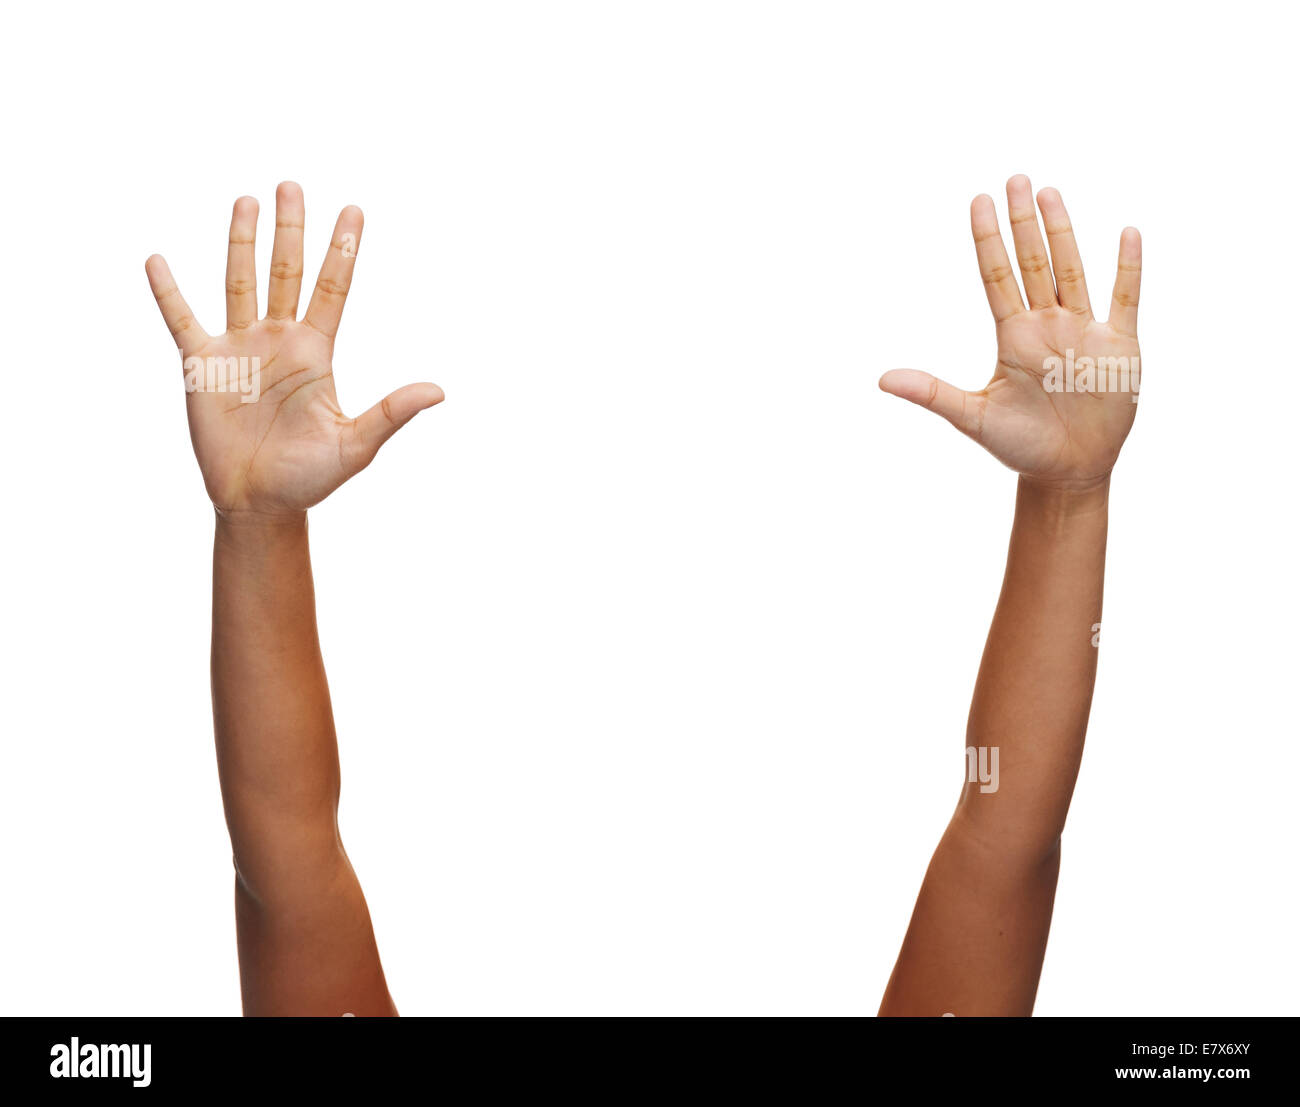 two woman hands waving hands Stock Photo